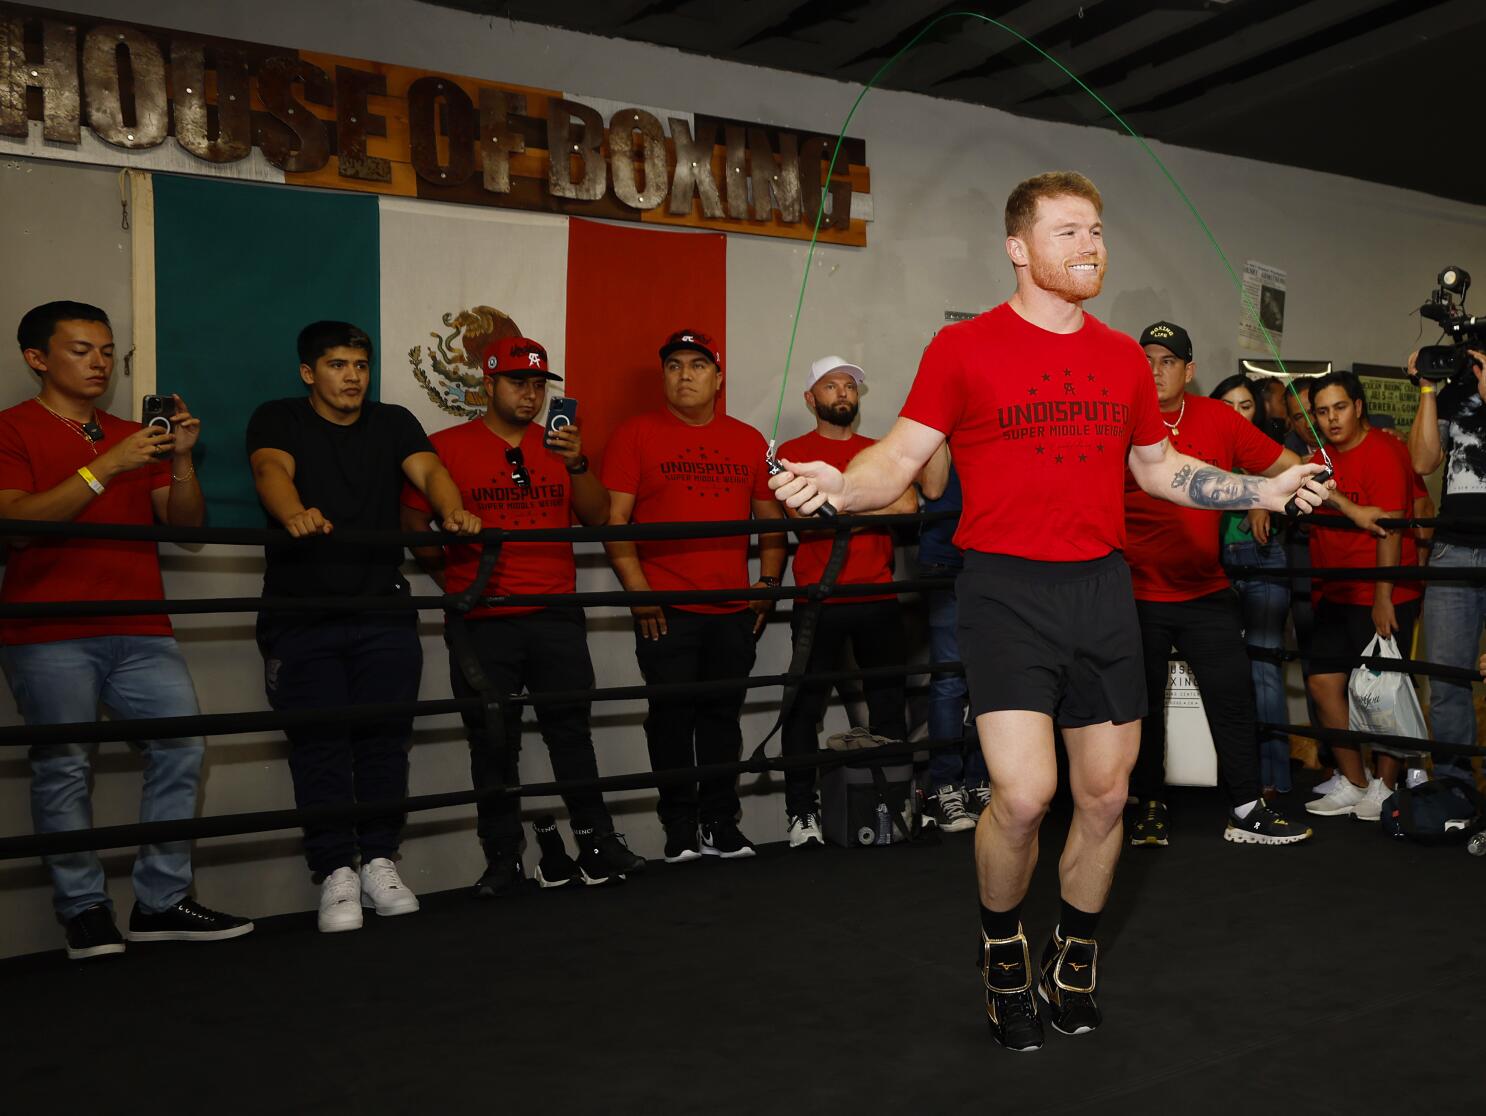 Why Canelo Álvarez may try to be a pro golfer after boxing - Los Angeles  Times